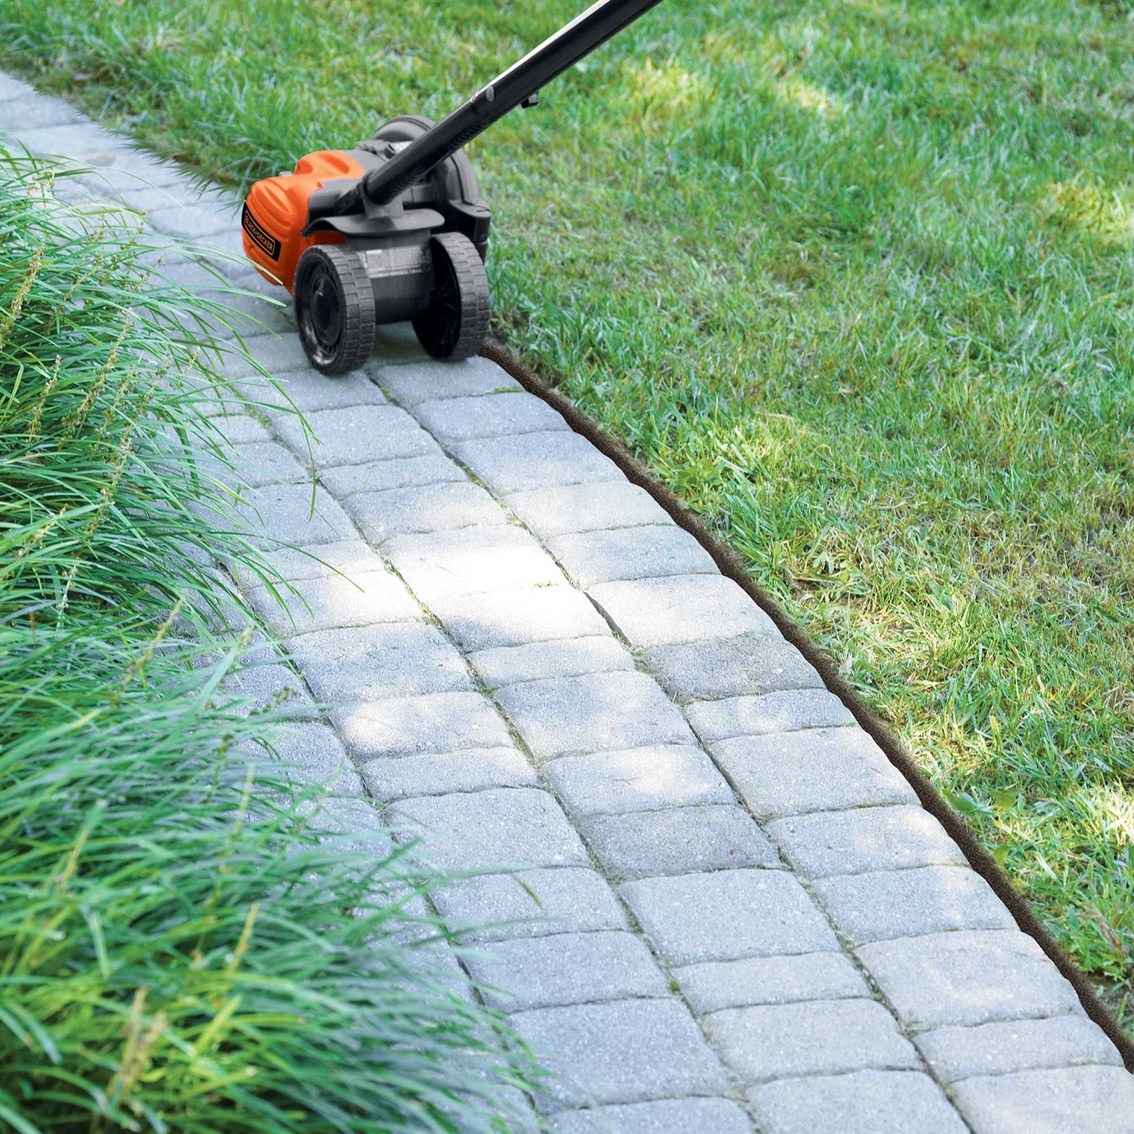 Black+Decker Edge Hog 2-in-1 Electric Edger and Trencher